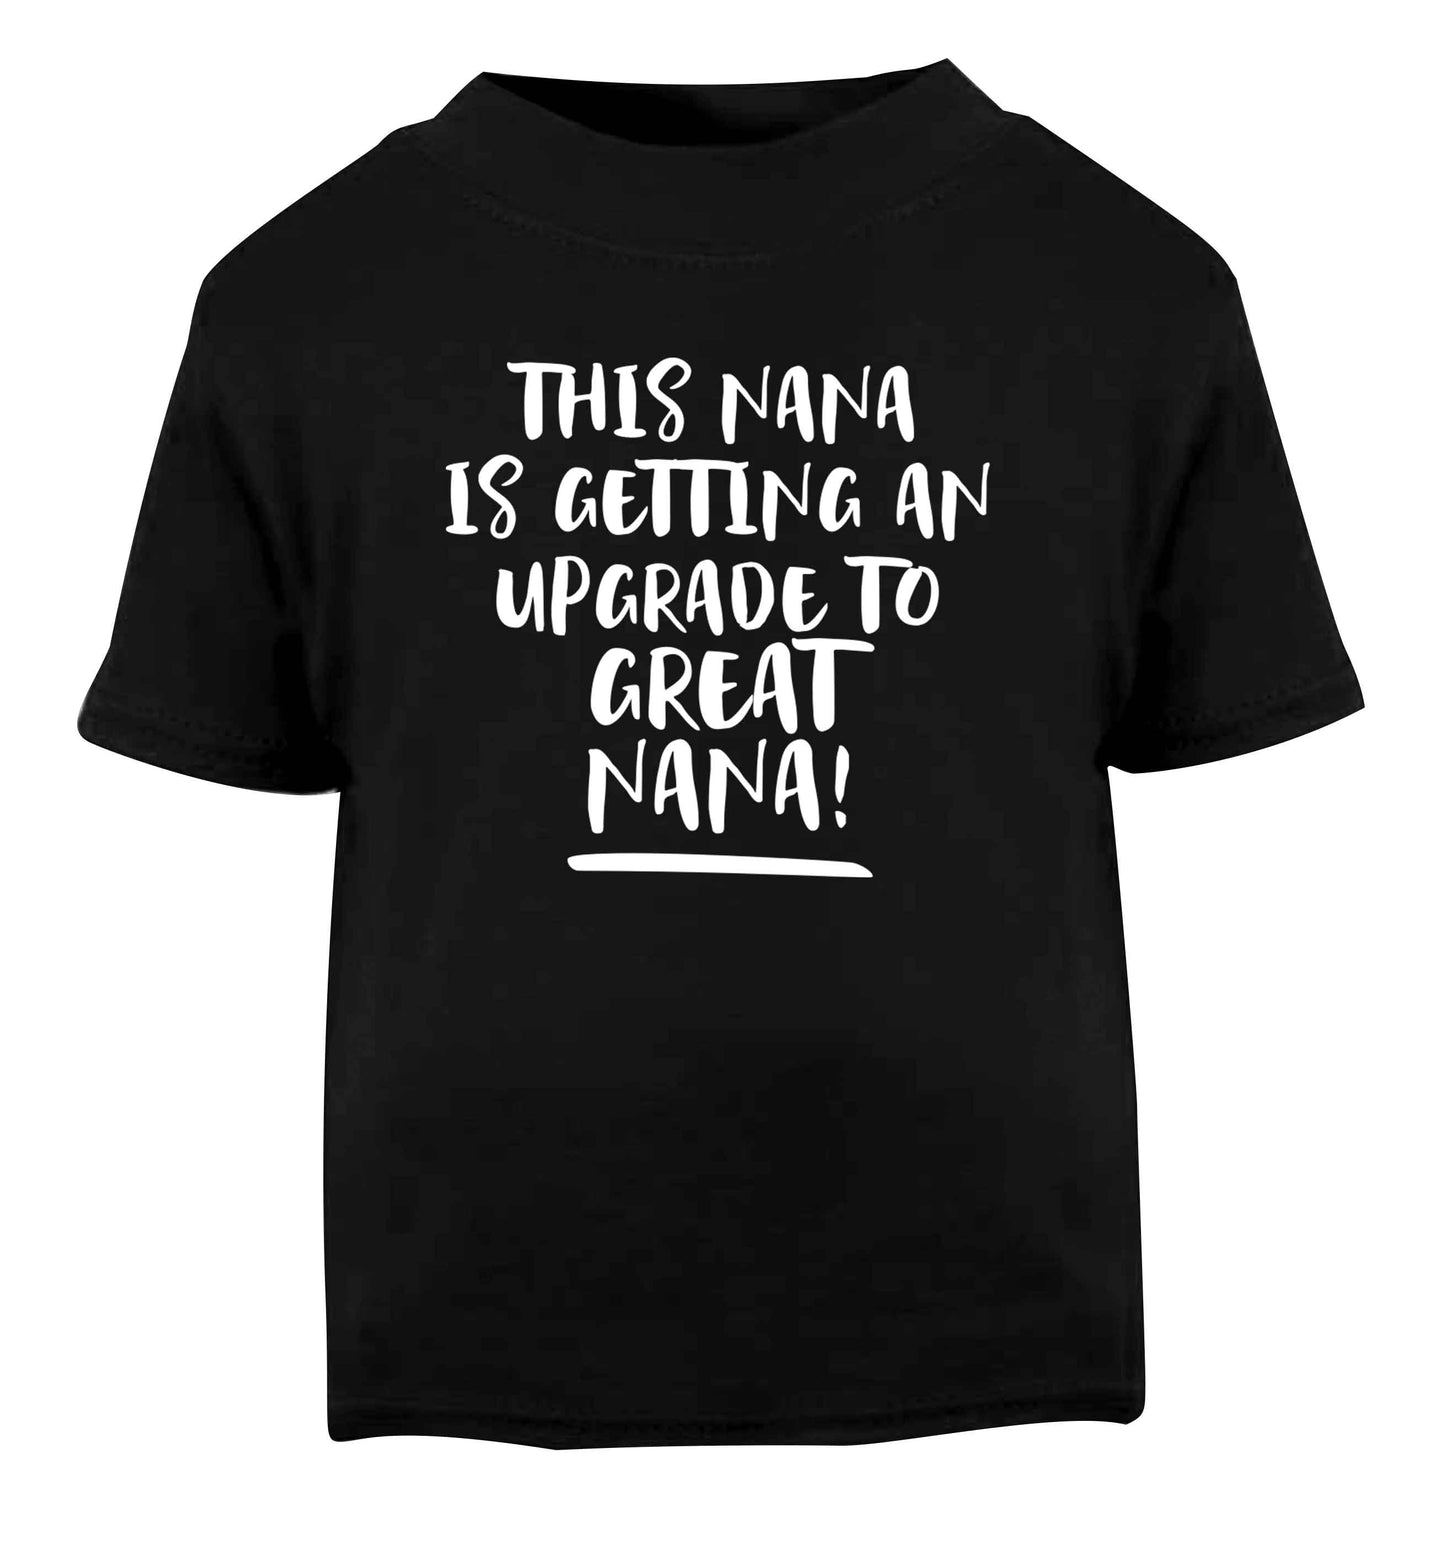 This nana is getting an upgrade to great nana! Black Baby Toddler Tshirt 2 years